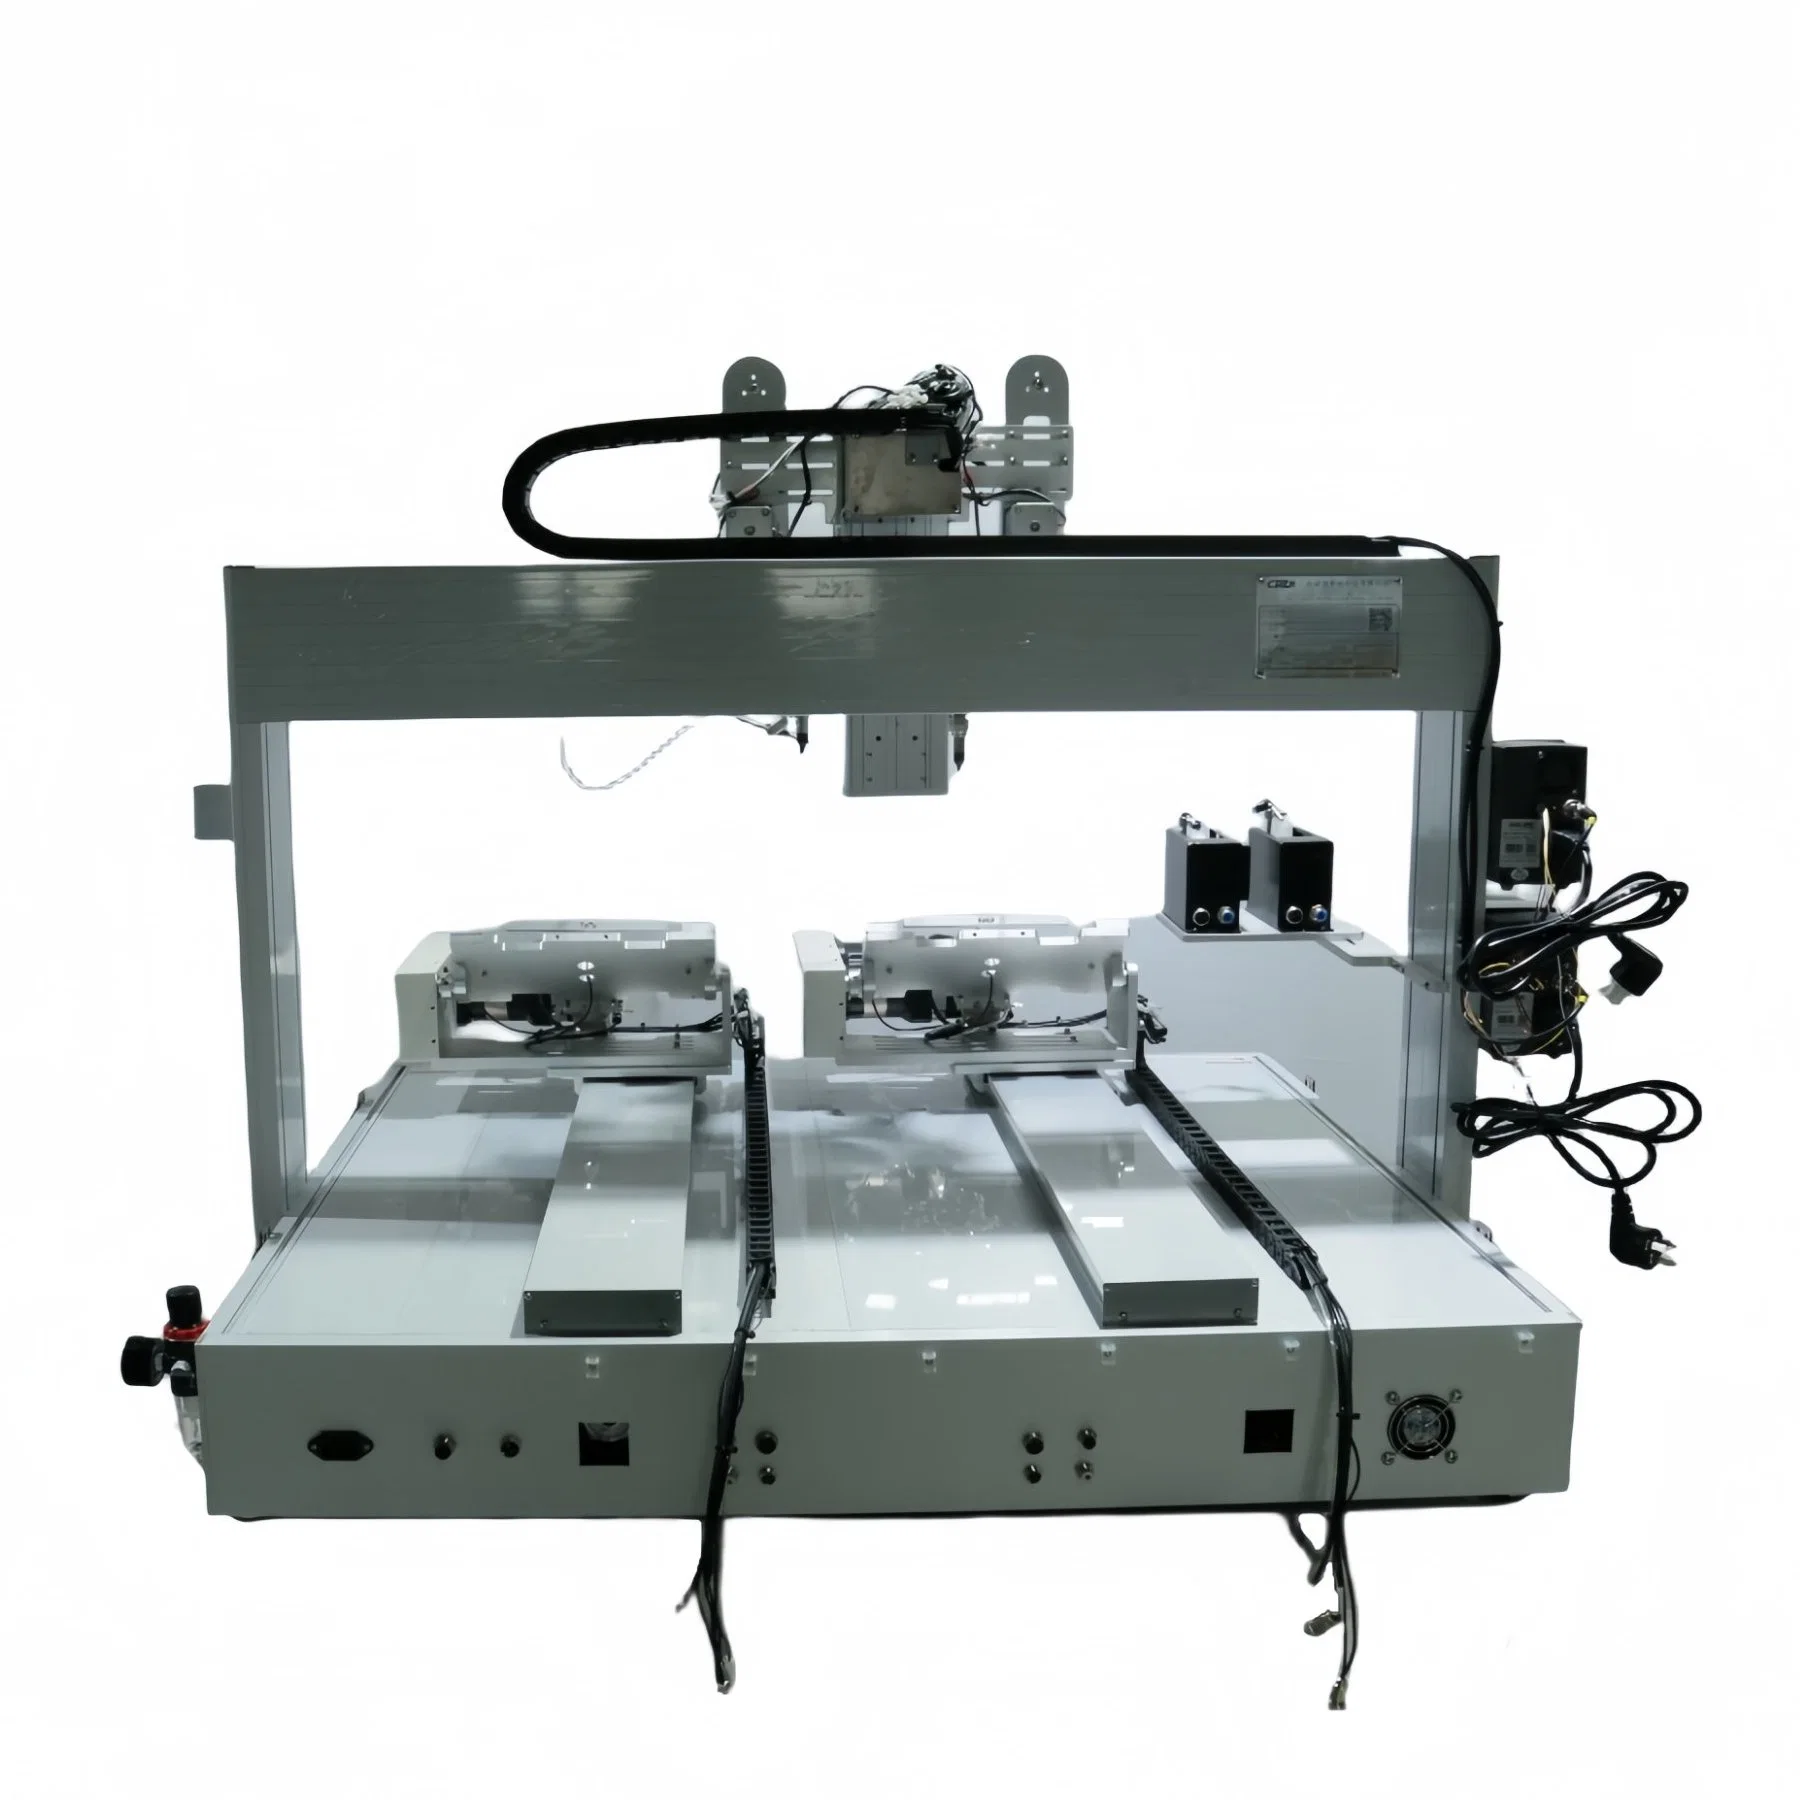 Ra Automatic Welding Tool/Auto Soldering Machine/Equipment/Robot/Tools/Station for PCB PCBA SMD